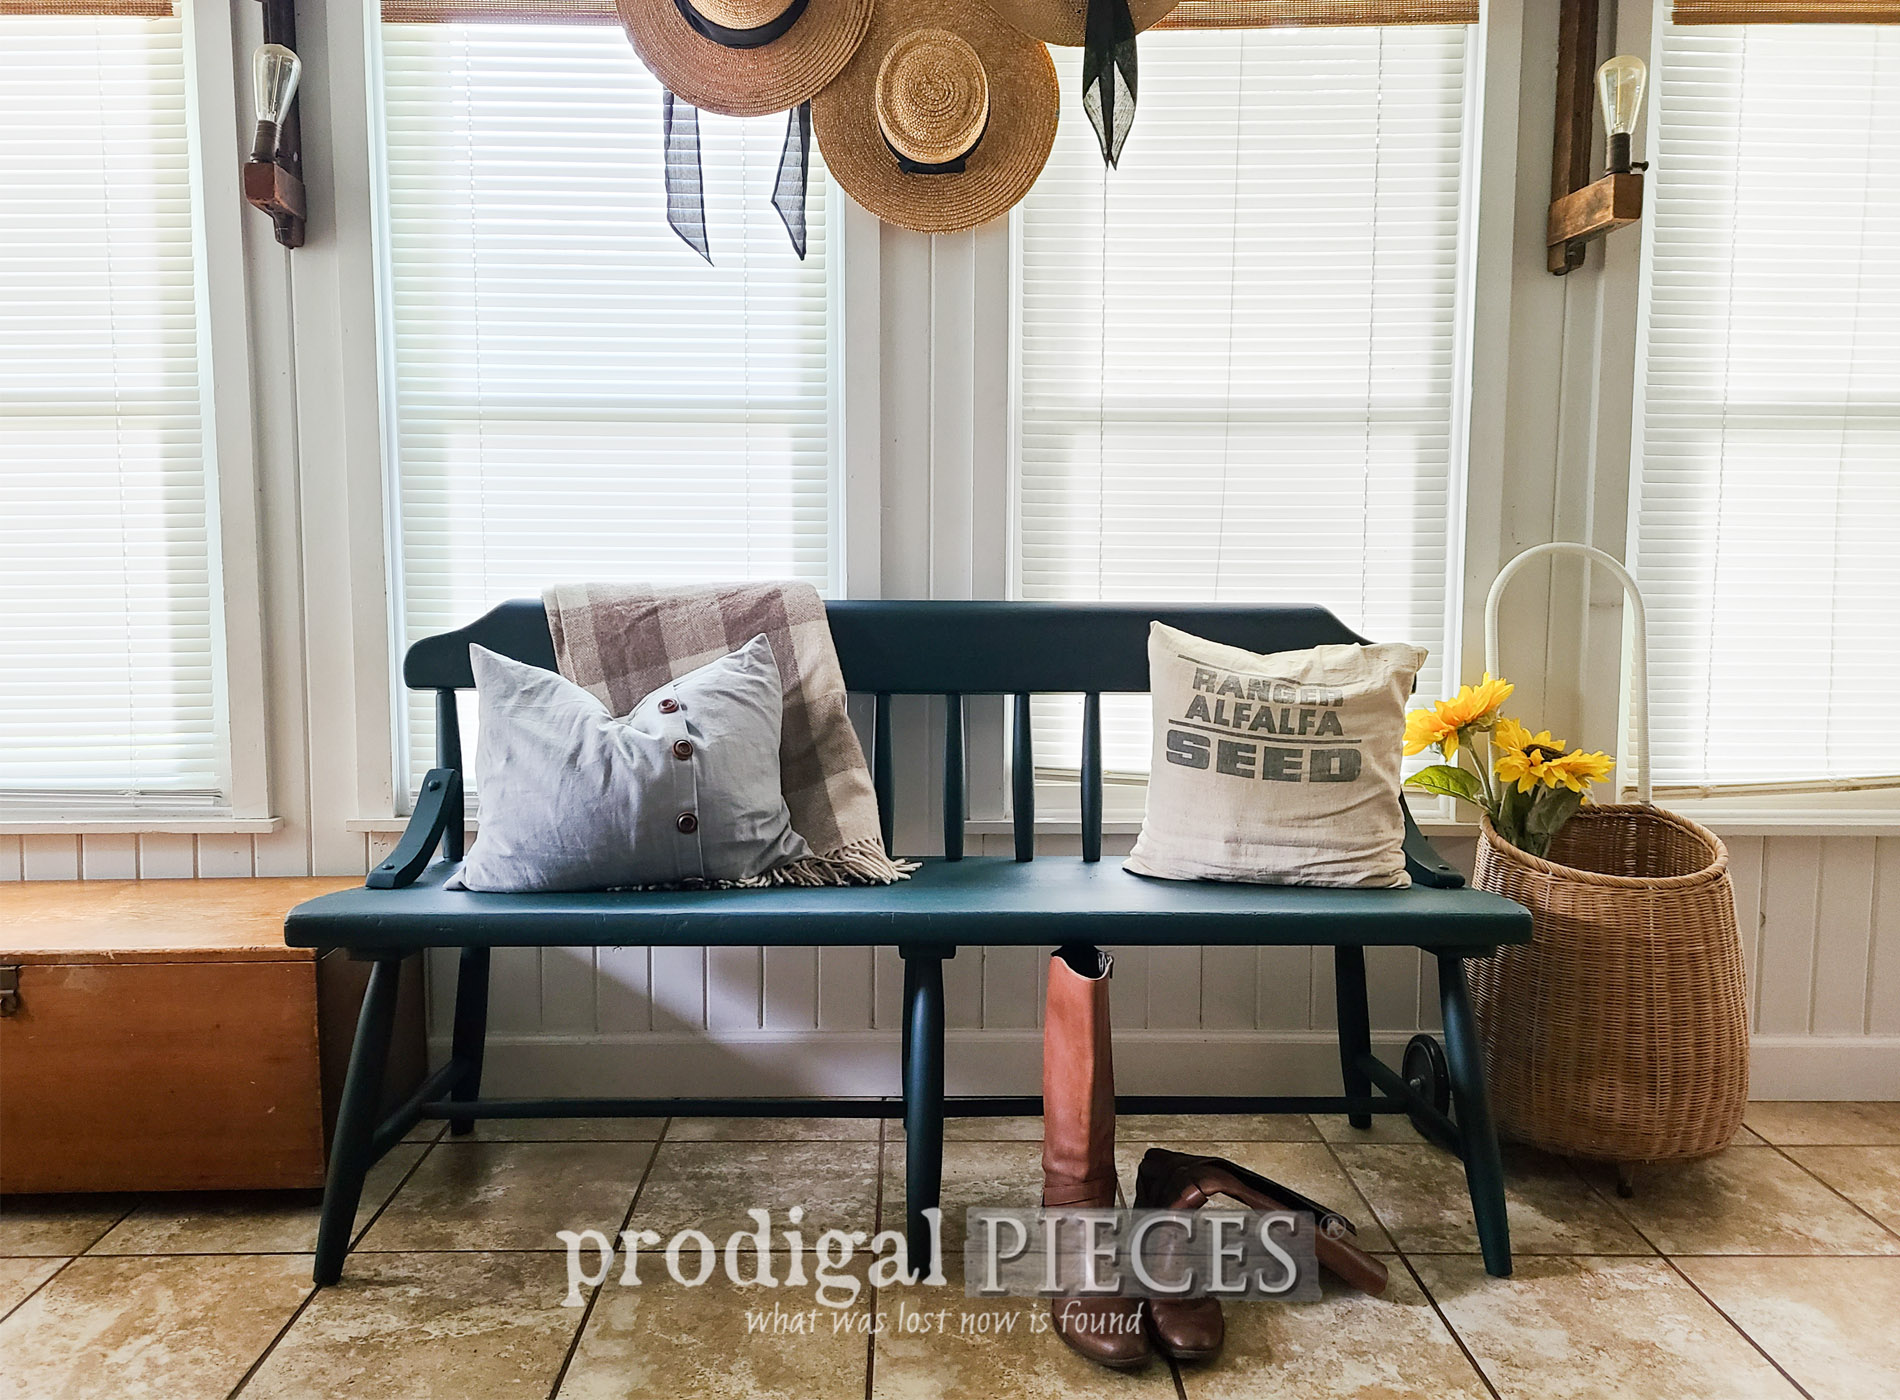 Featured Vintage Farmhouse Bench Makeover by Larissa of Prodigal Pieces | prodigalpieces.com #prodigalpieces #farmhouse #diy #furntiure